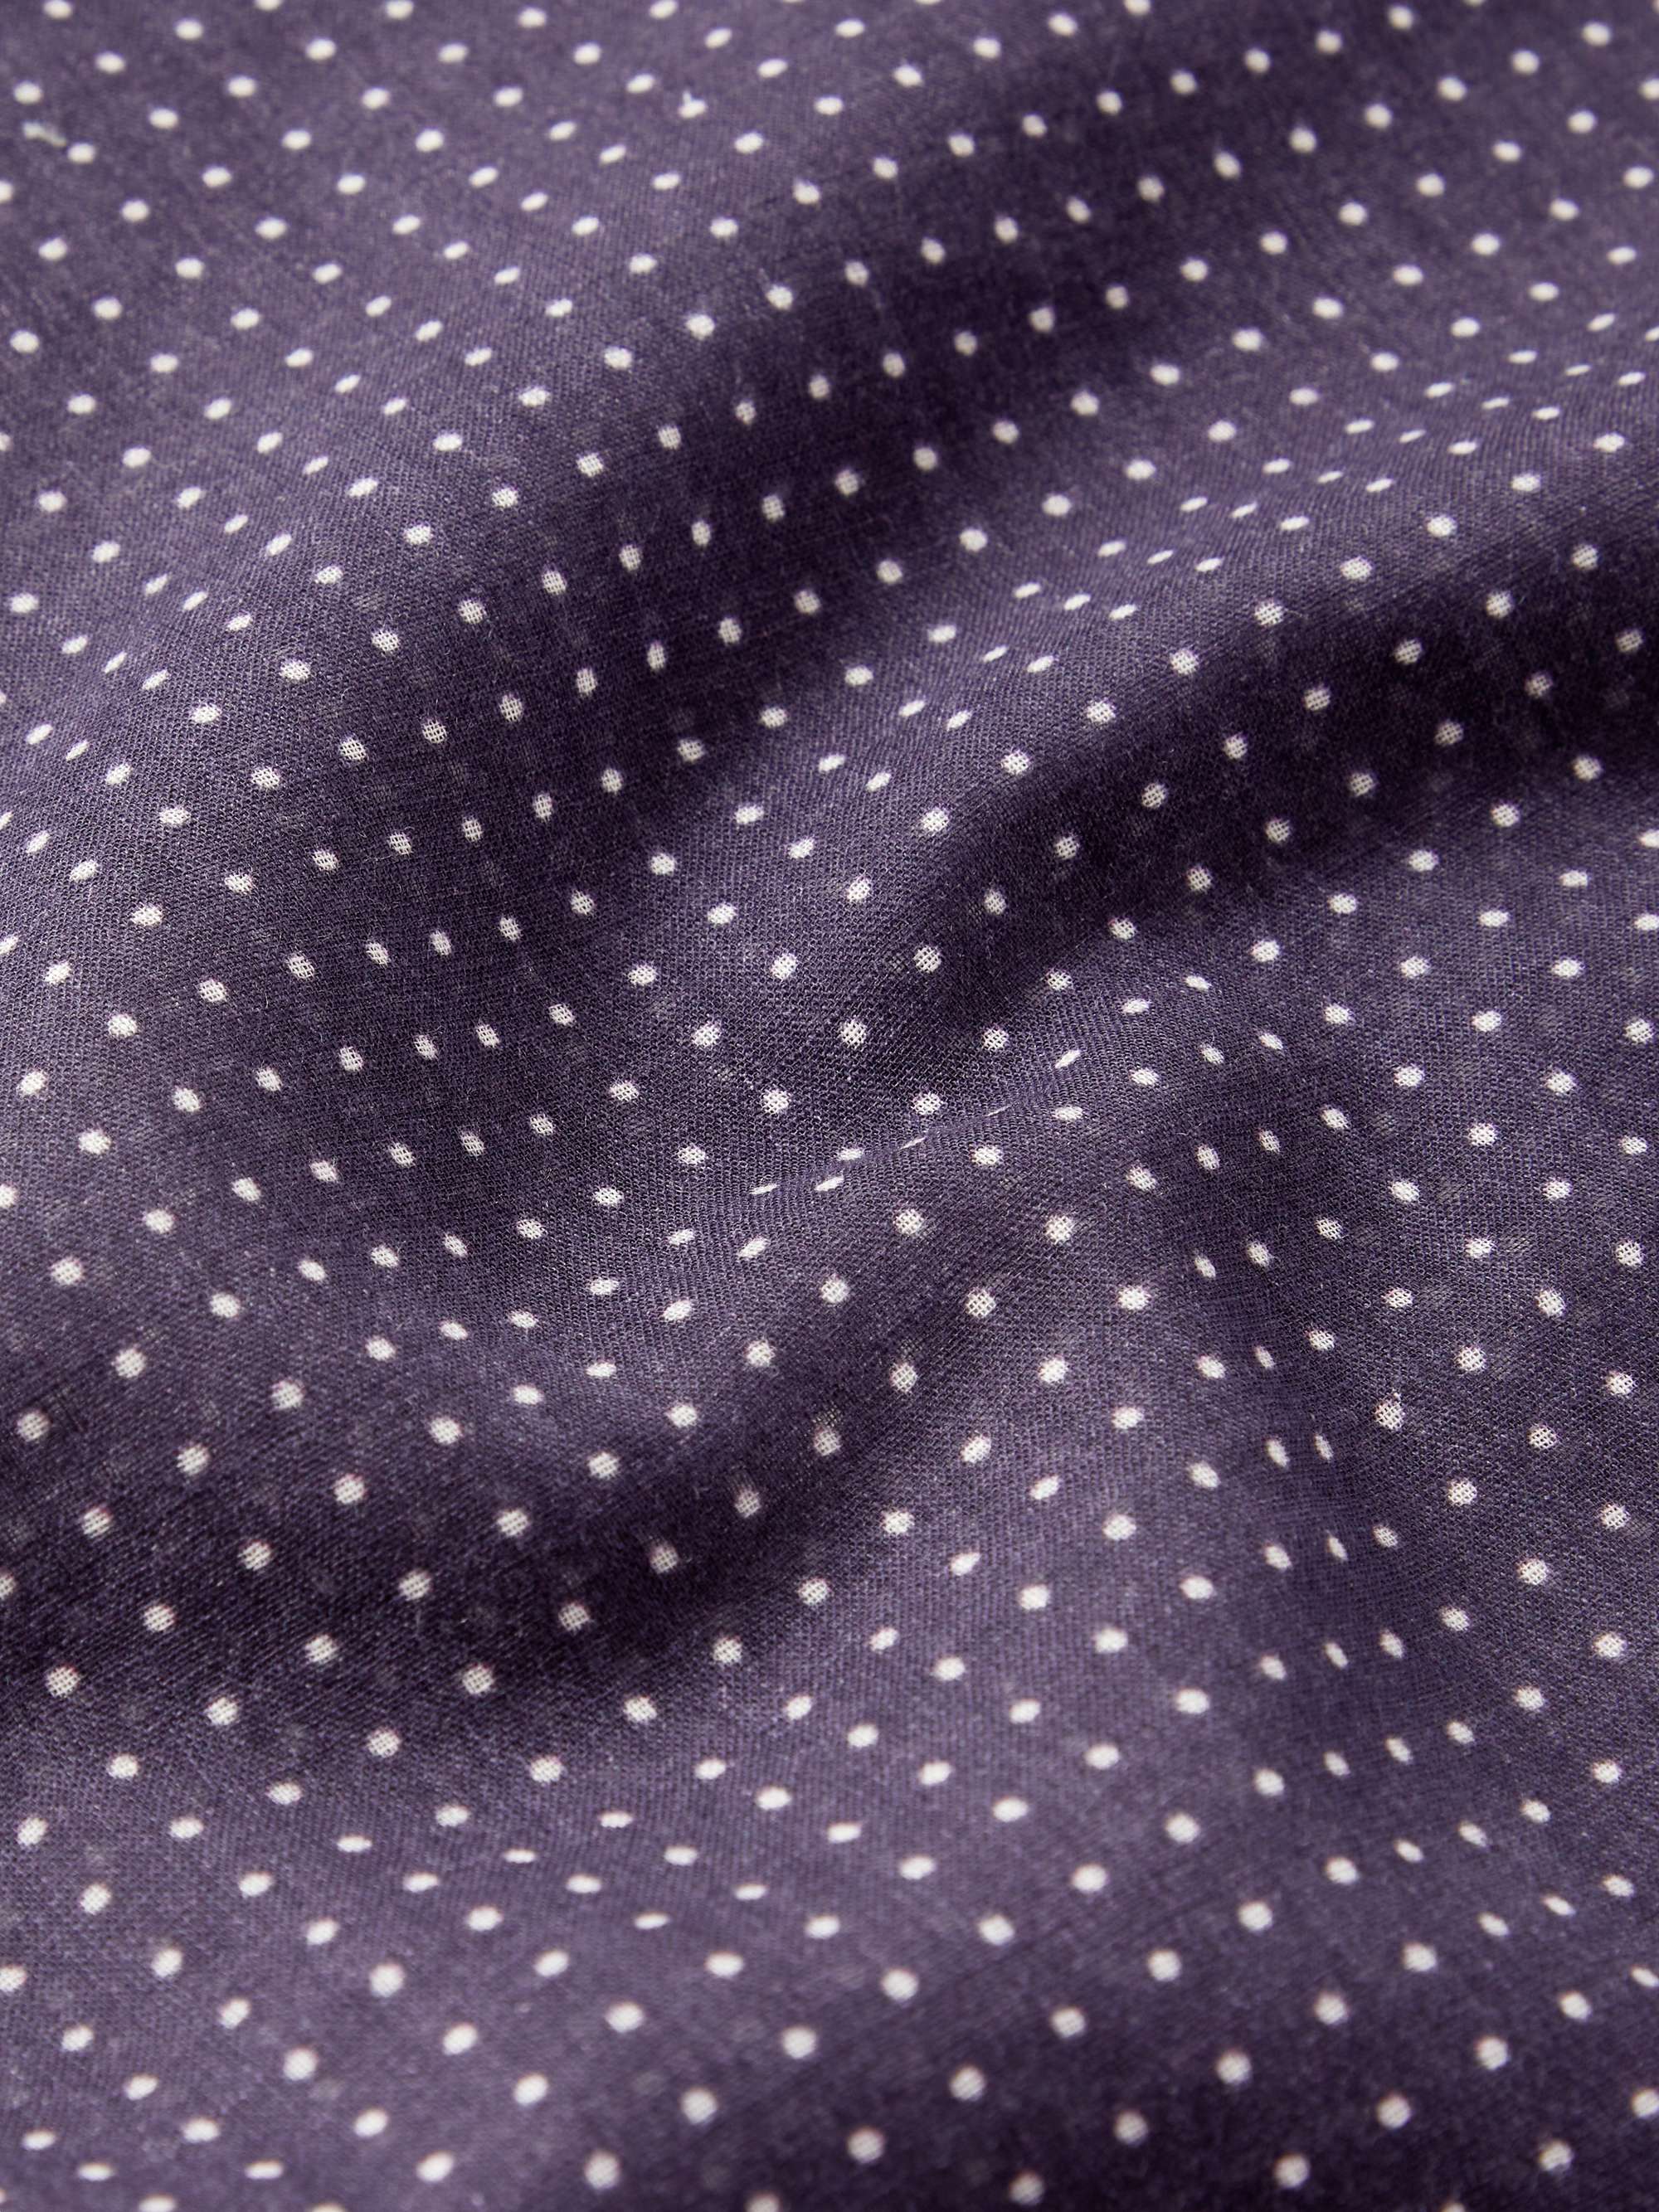 ANDERSON & SHEPPARD Polka-Dot Cotton-Voile Scarf